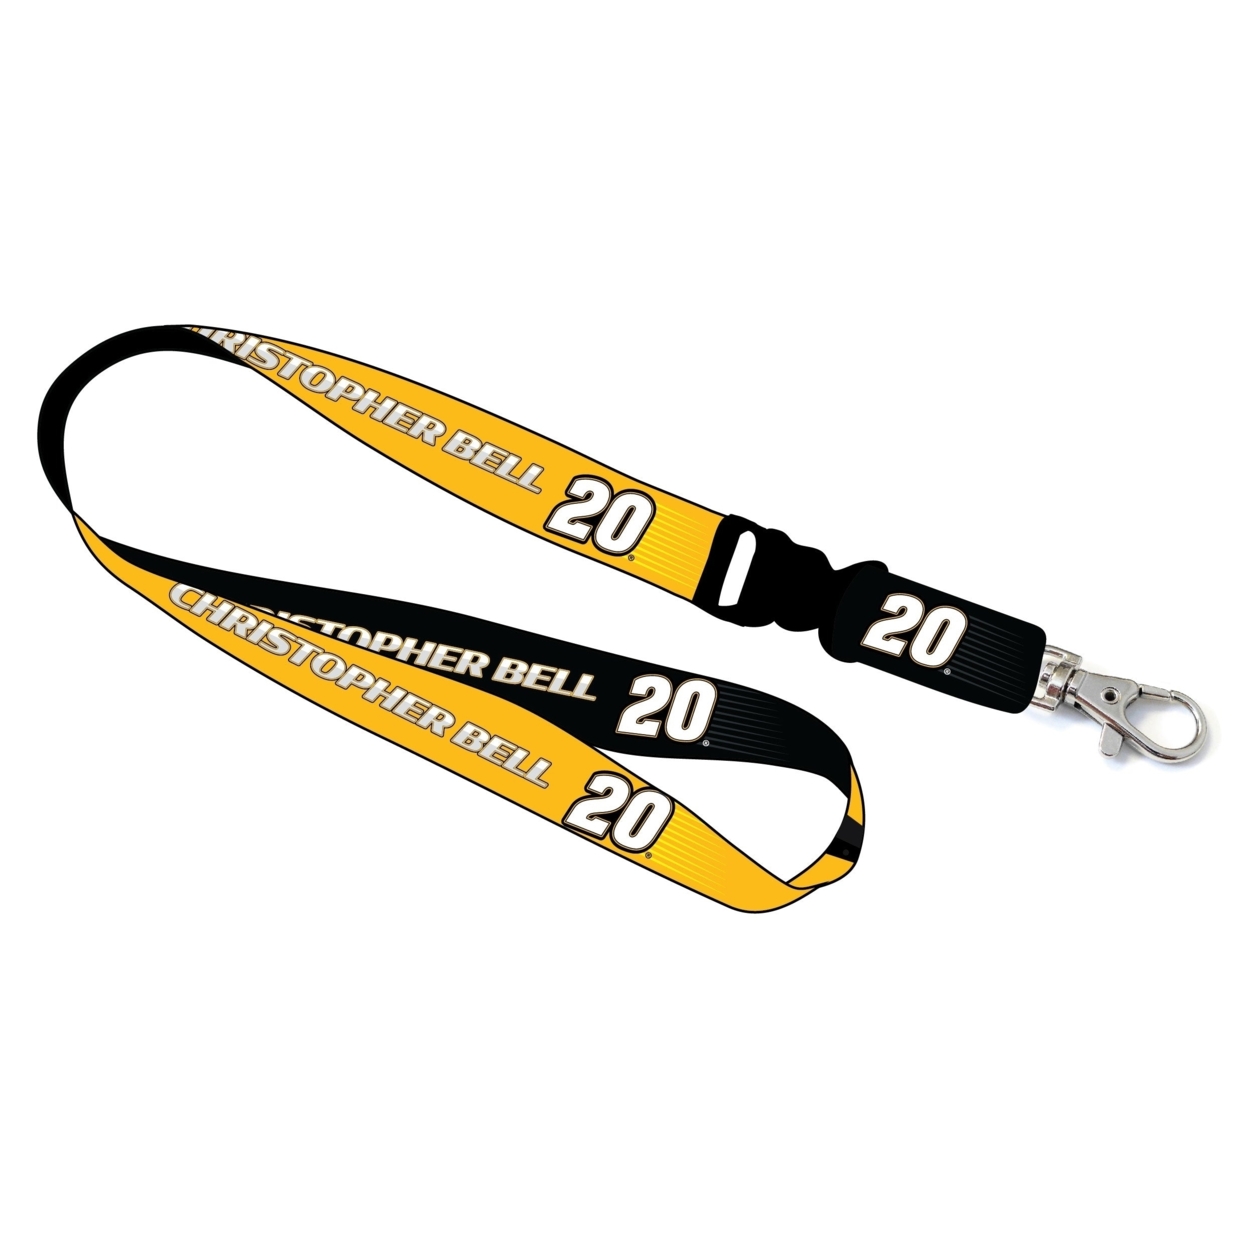 Christopher Bell #20 NASCAR Cup Series Lanyard New For 2021